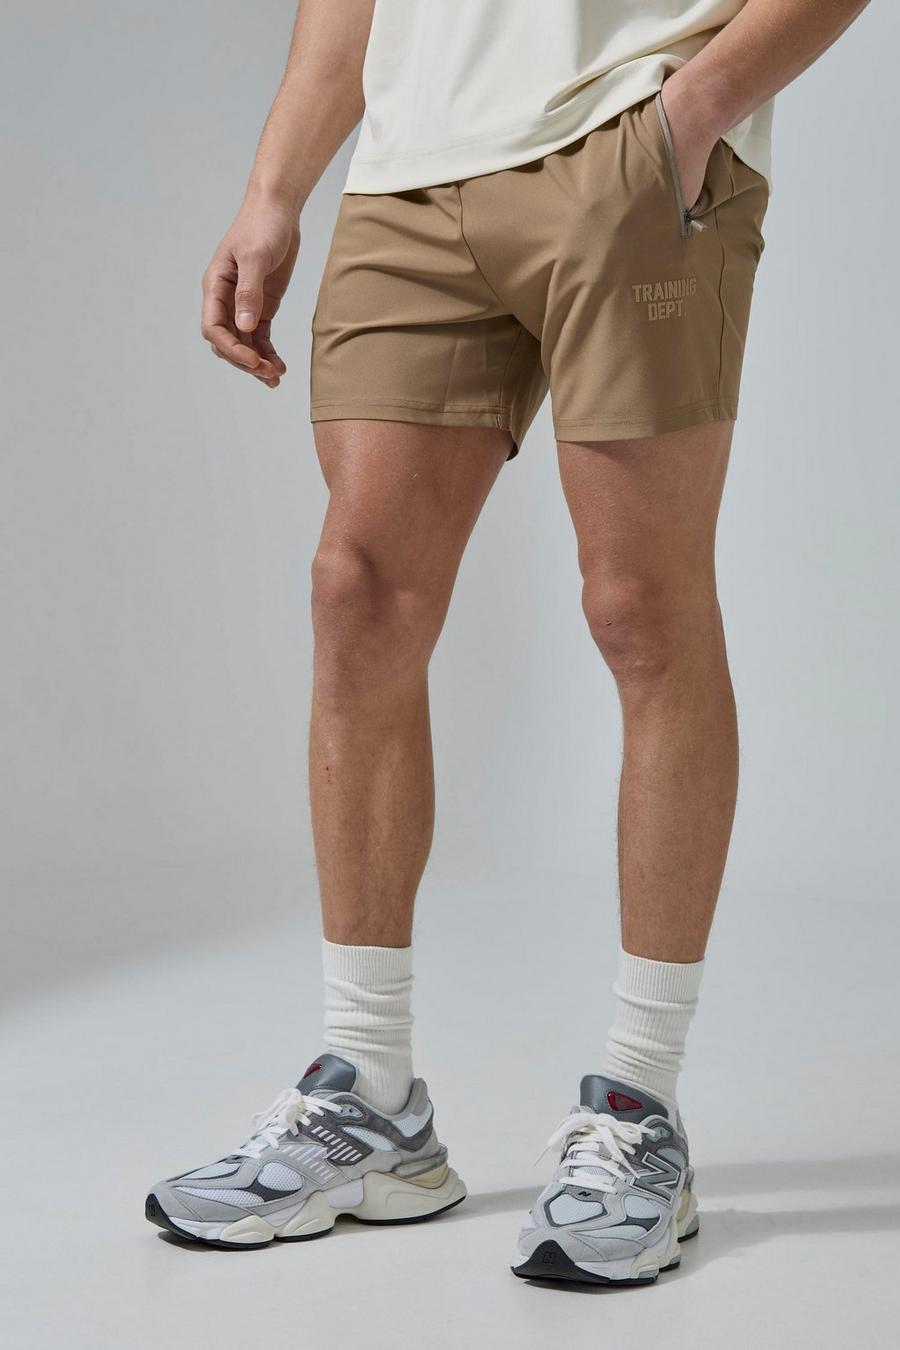 Active Training Dept 5 Inch Shorts, Brown